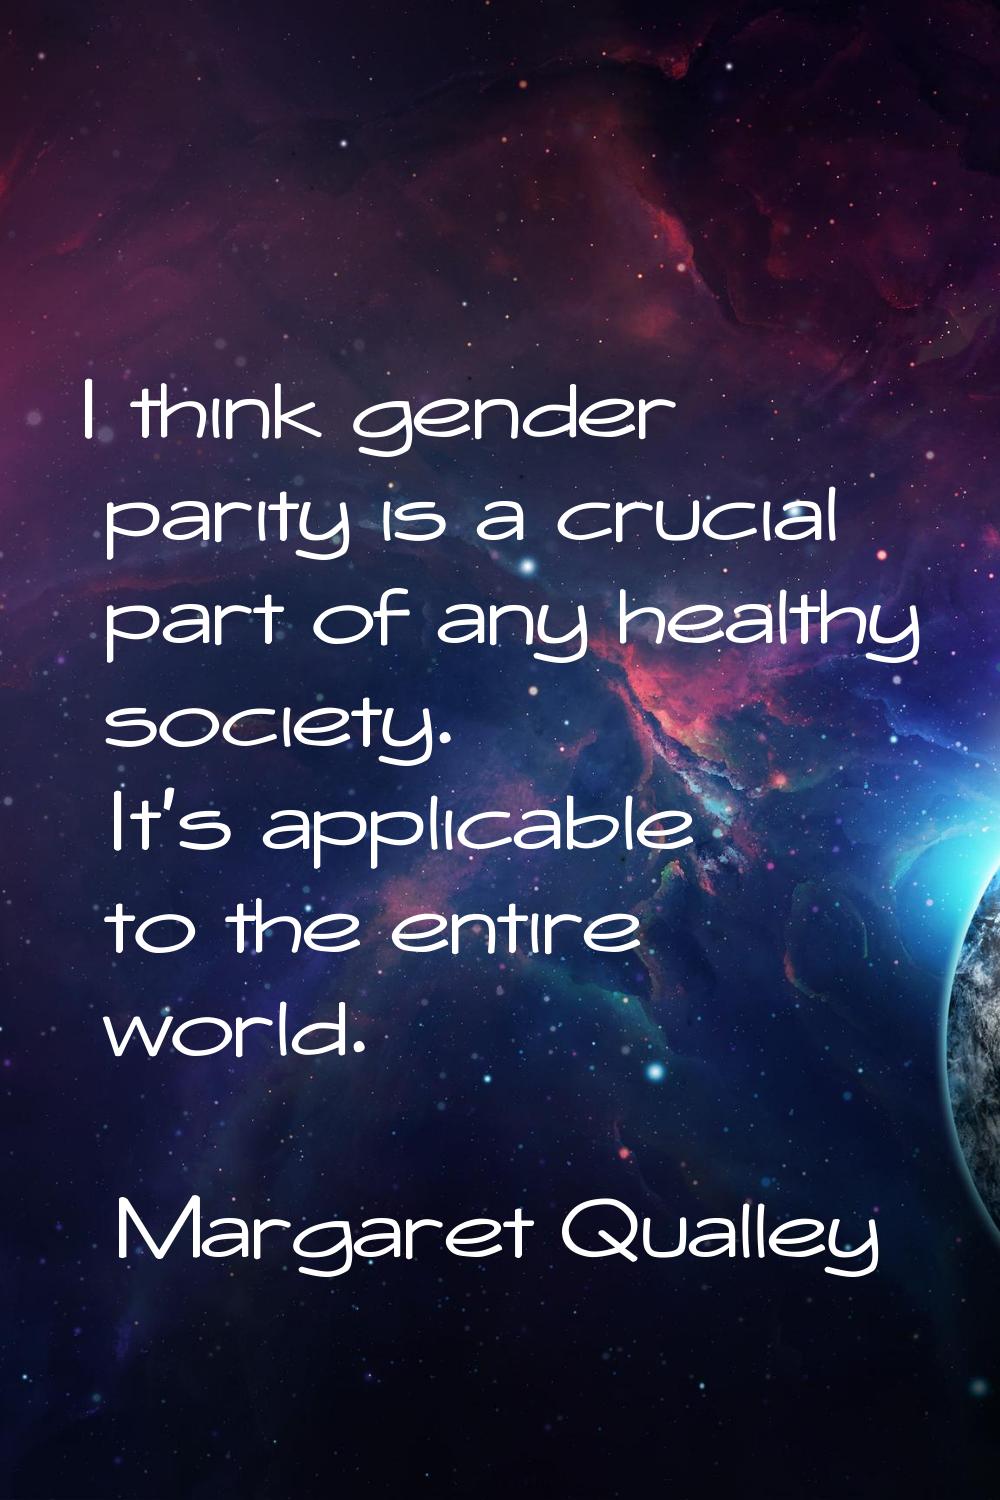 I think gender parity is a crucial part of any healthy society. It's applicable to the entire world